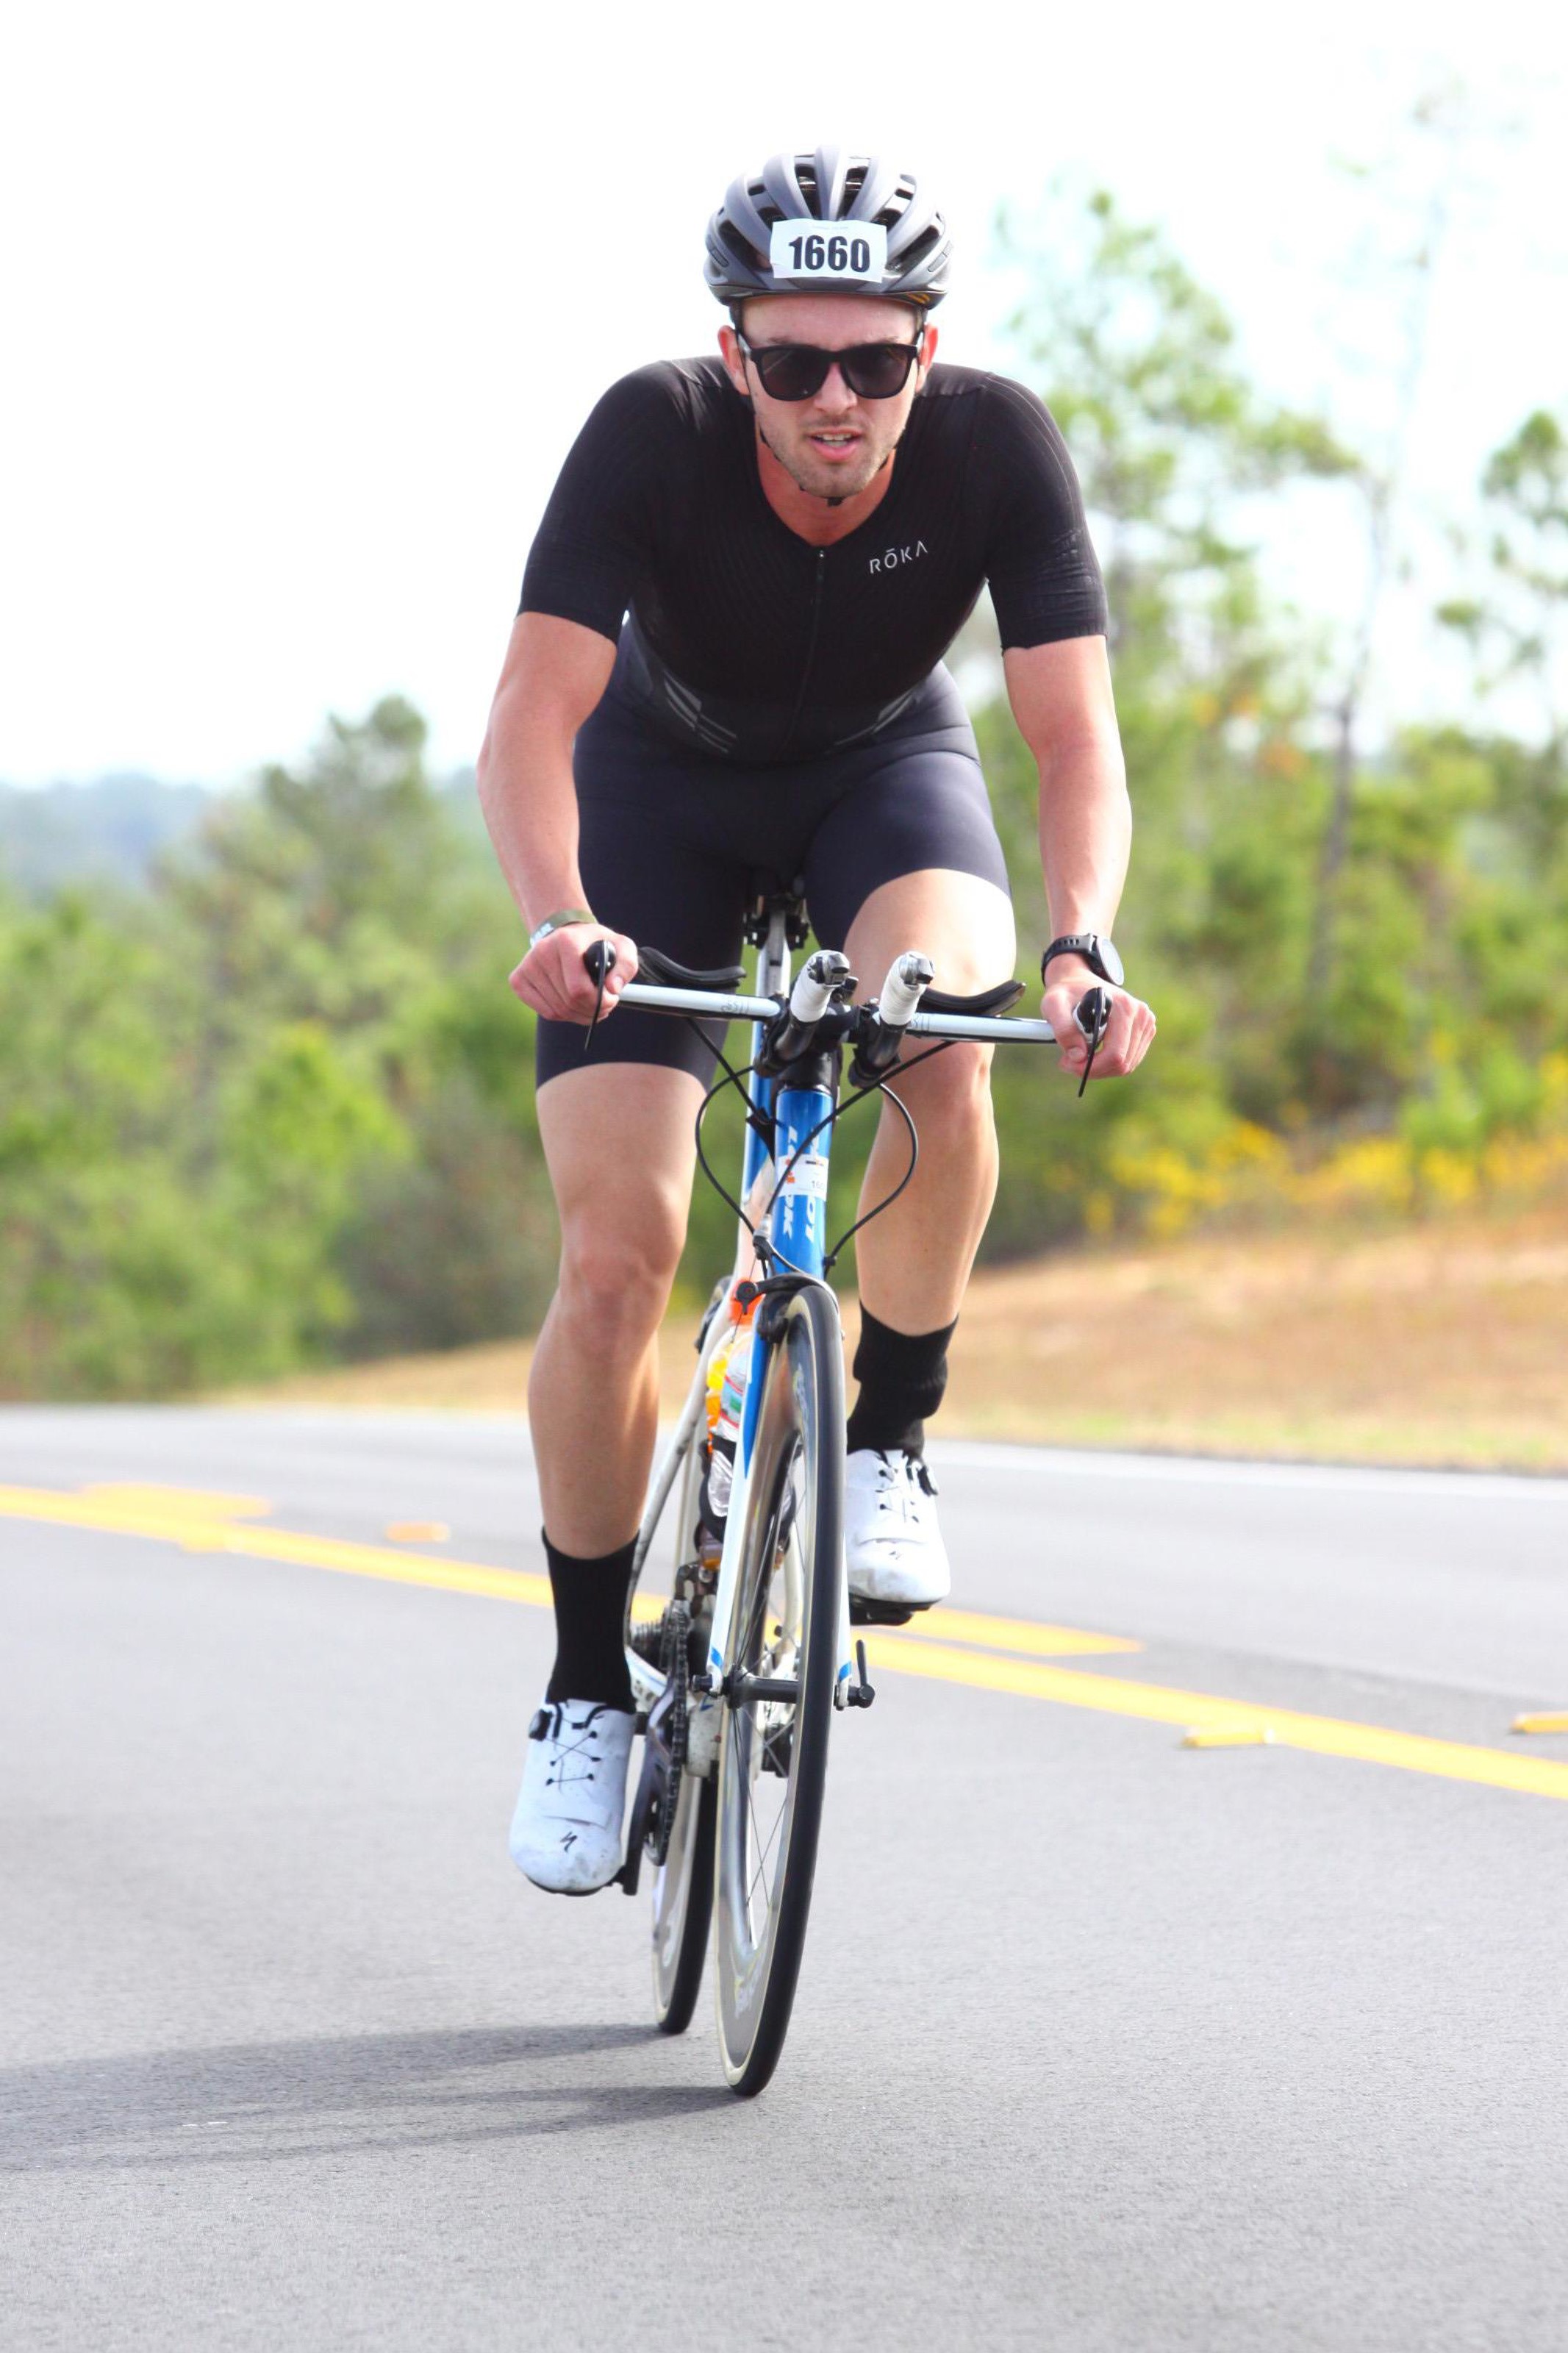 In 2022, Jake Benoit completed his first Ironman triathlon and completed his MBA online at UL Lafayette